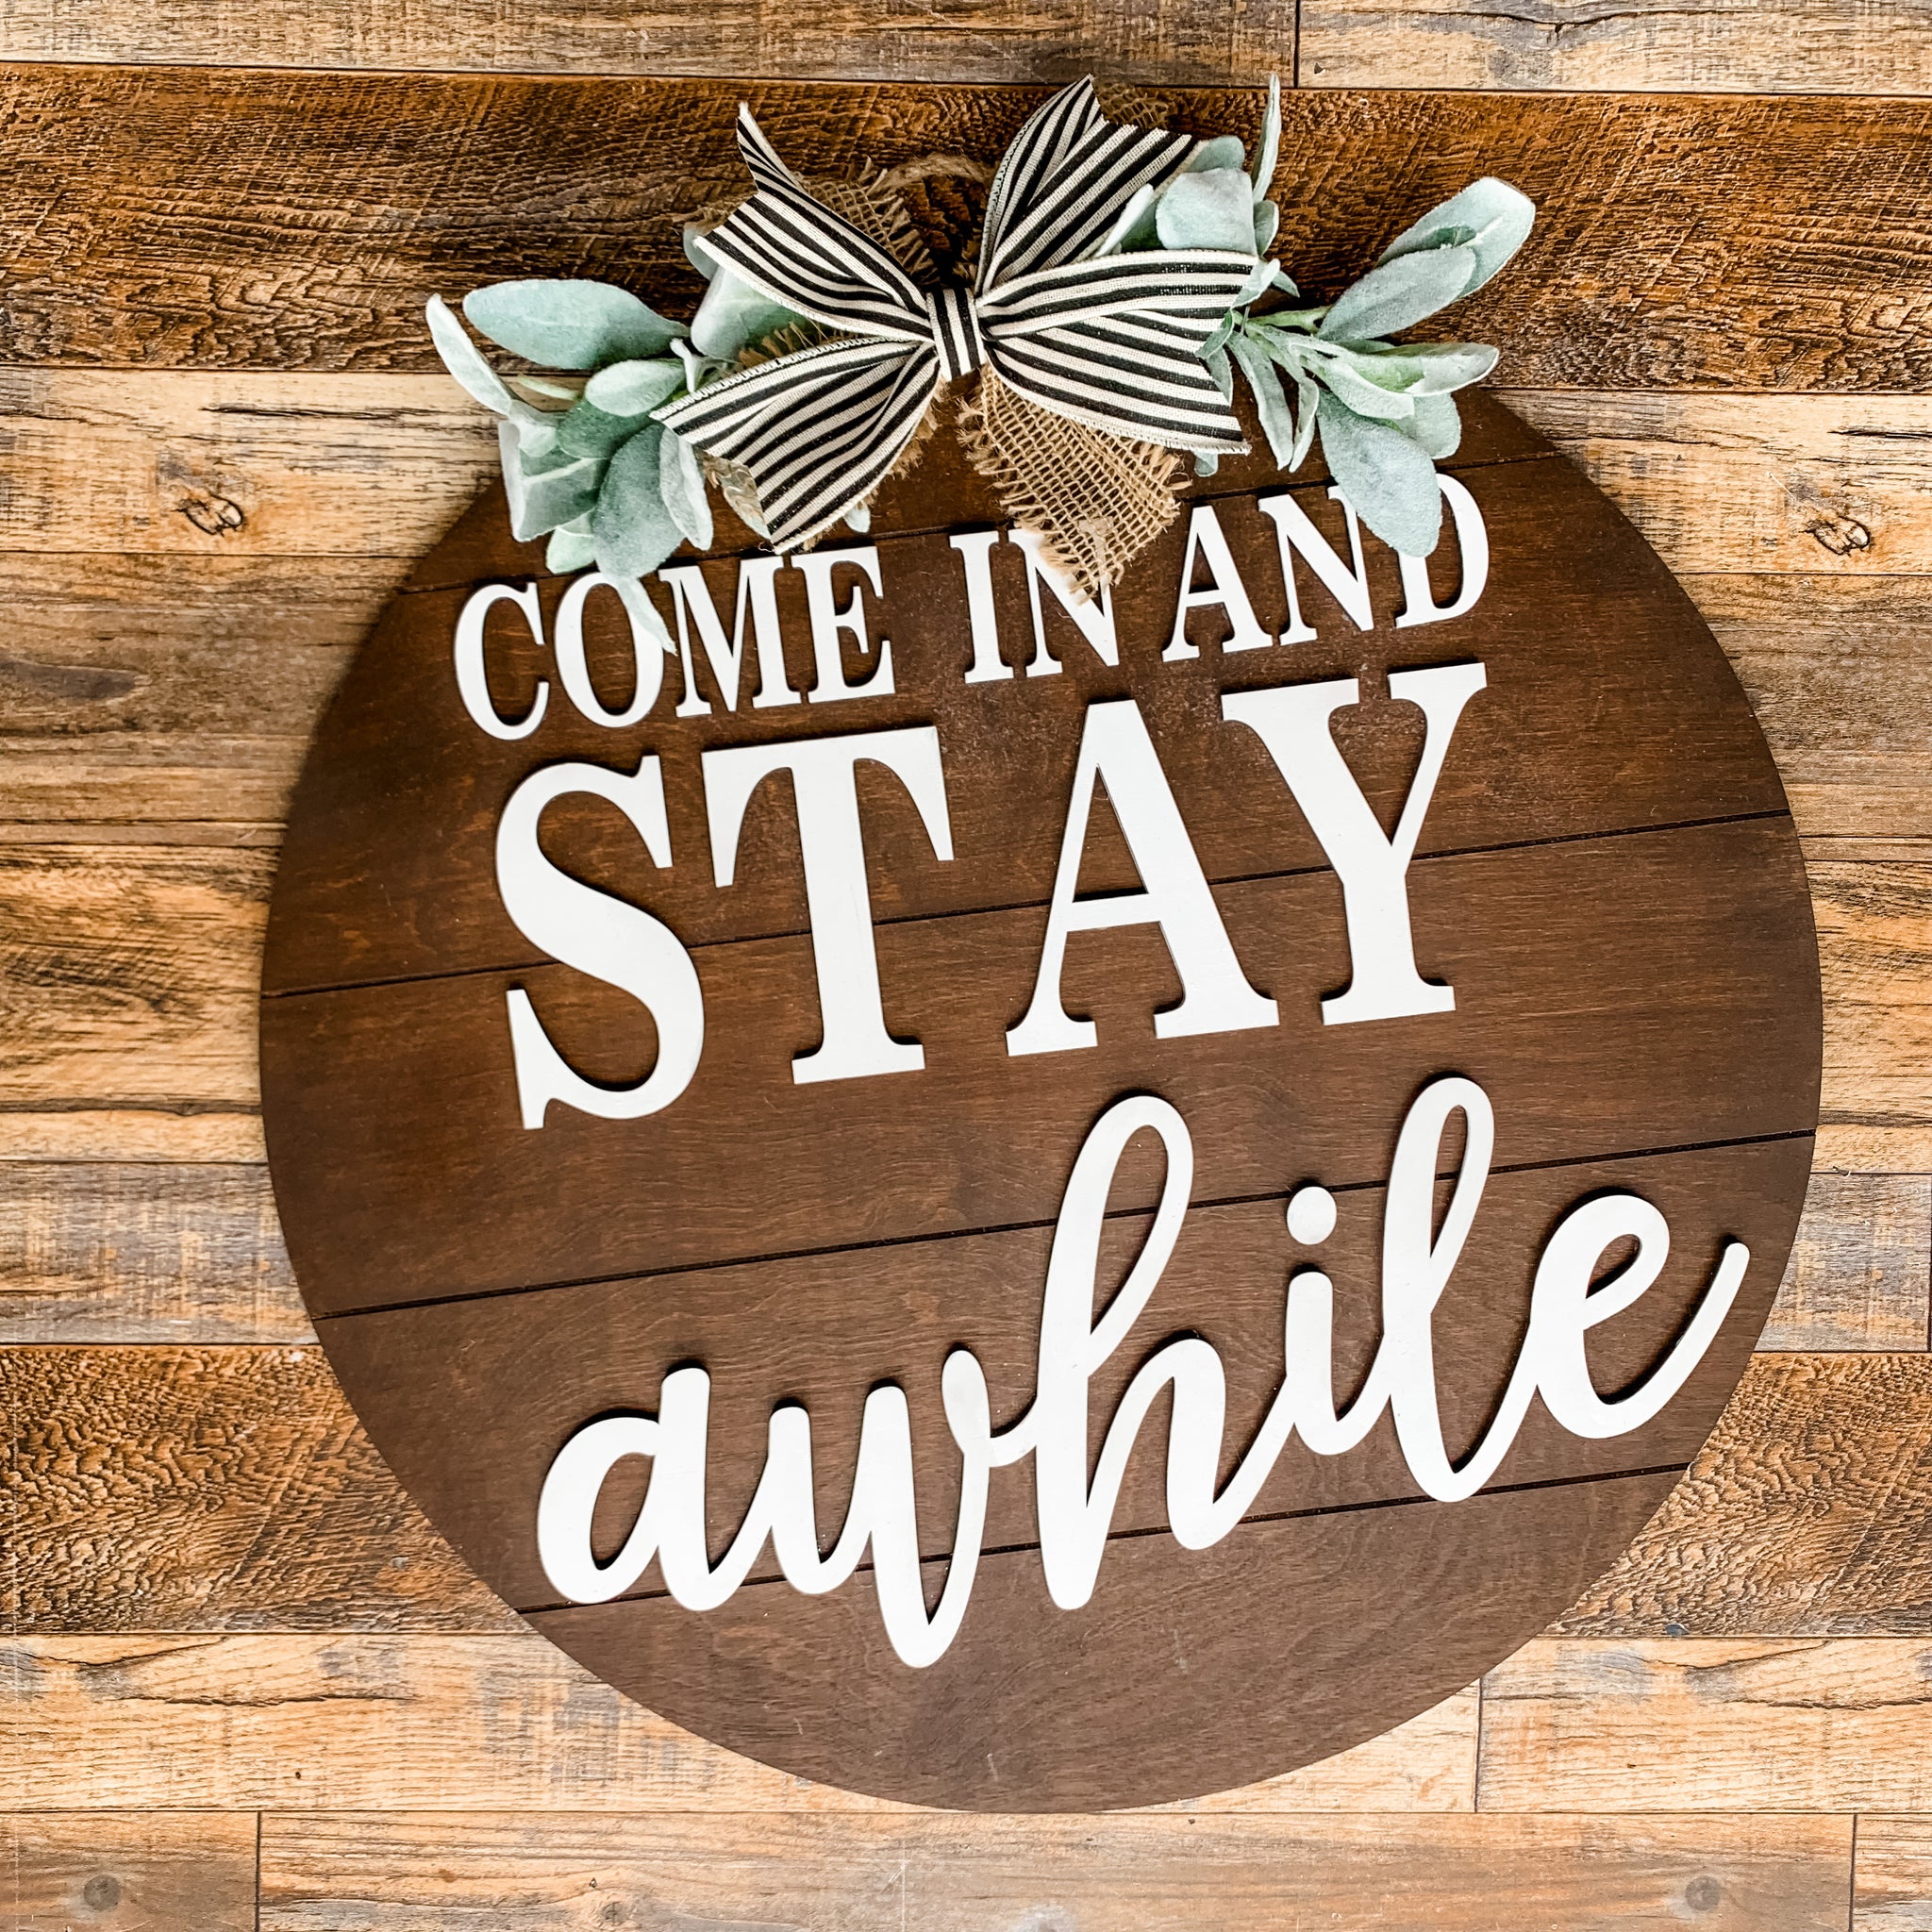 Come in and stay awhile door hanger sign